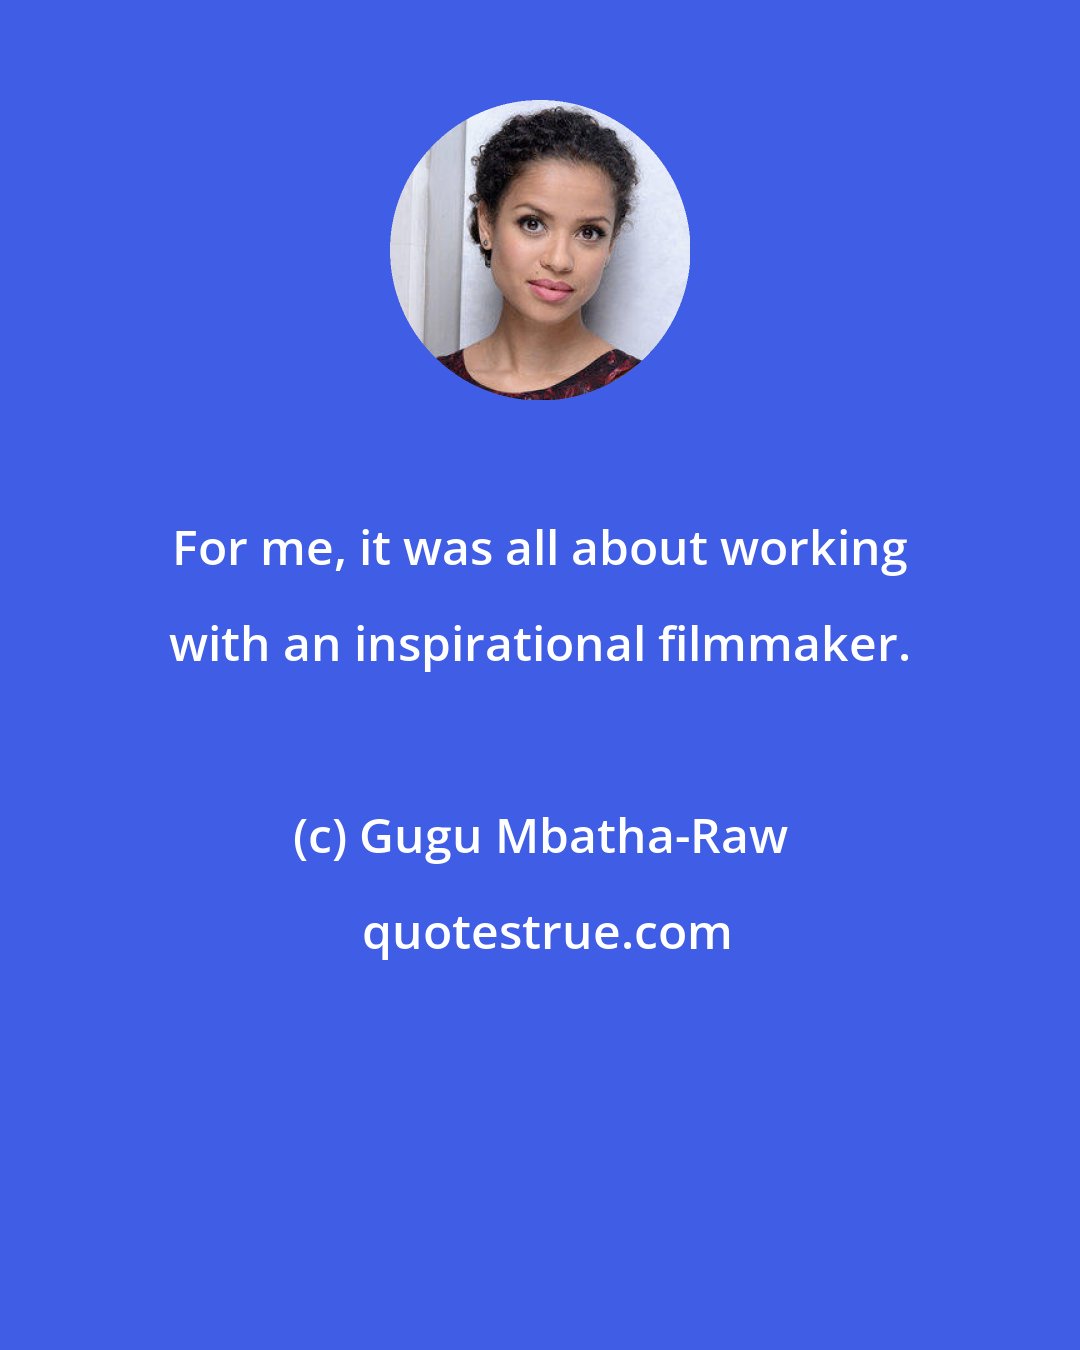 Gugu Mbatha-Raw: For me, it was all about working with an inspirational filmmaker.